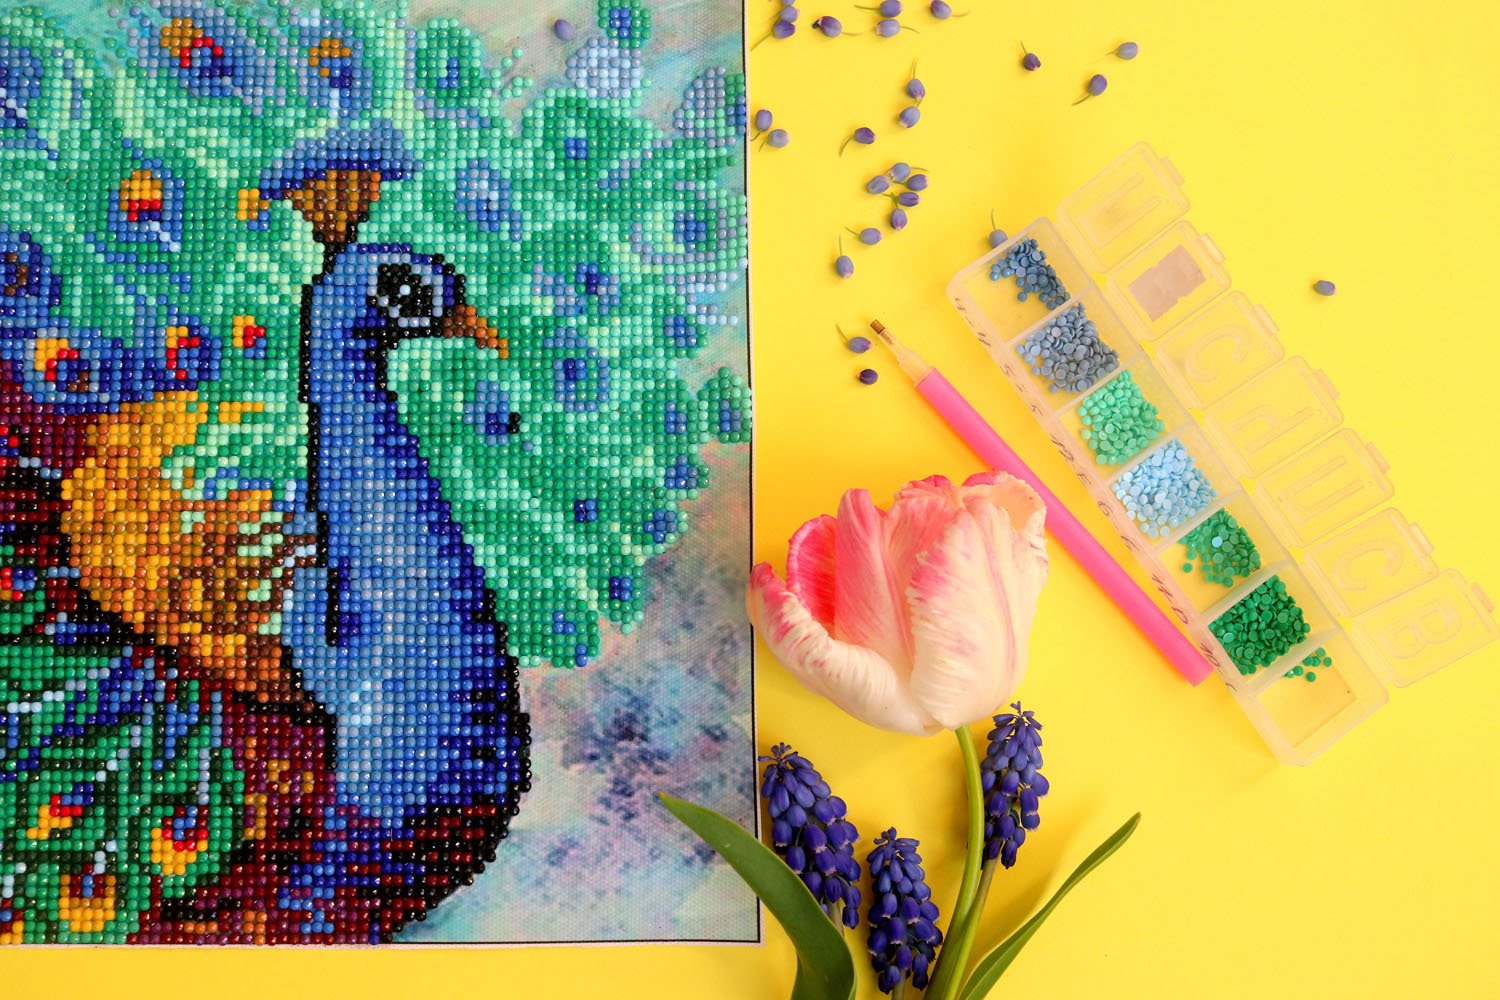 What is Diamond Painting? A Beginner's Guide - Happiness is Homemade